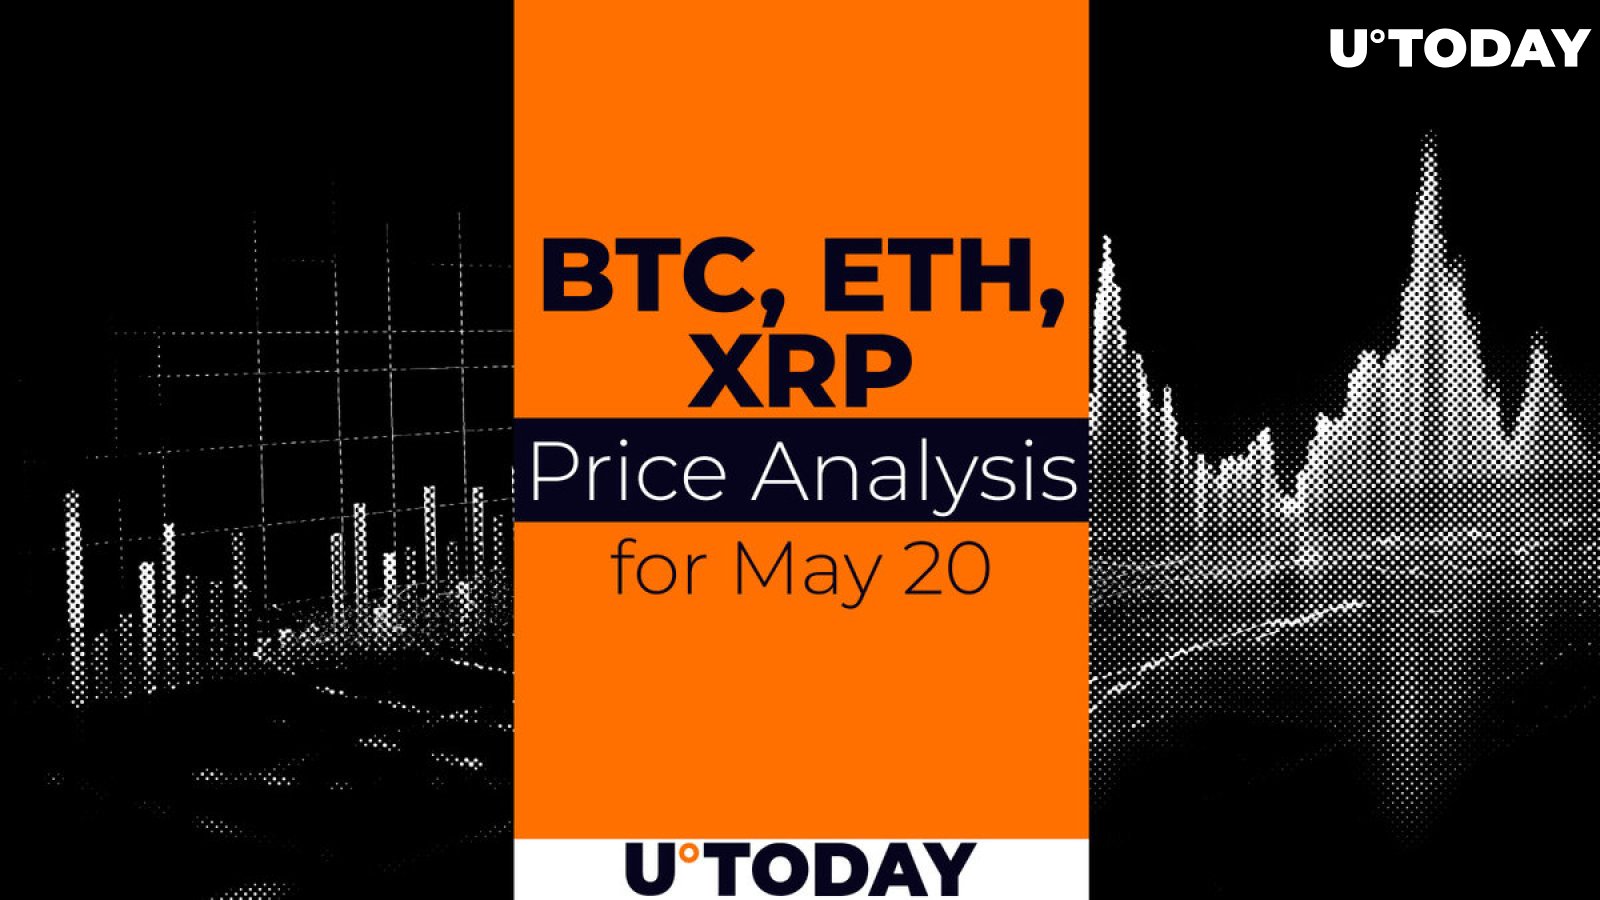 BTC, ETH and XRP Price Prediction for May 20